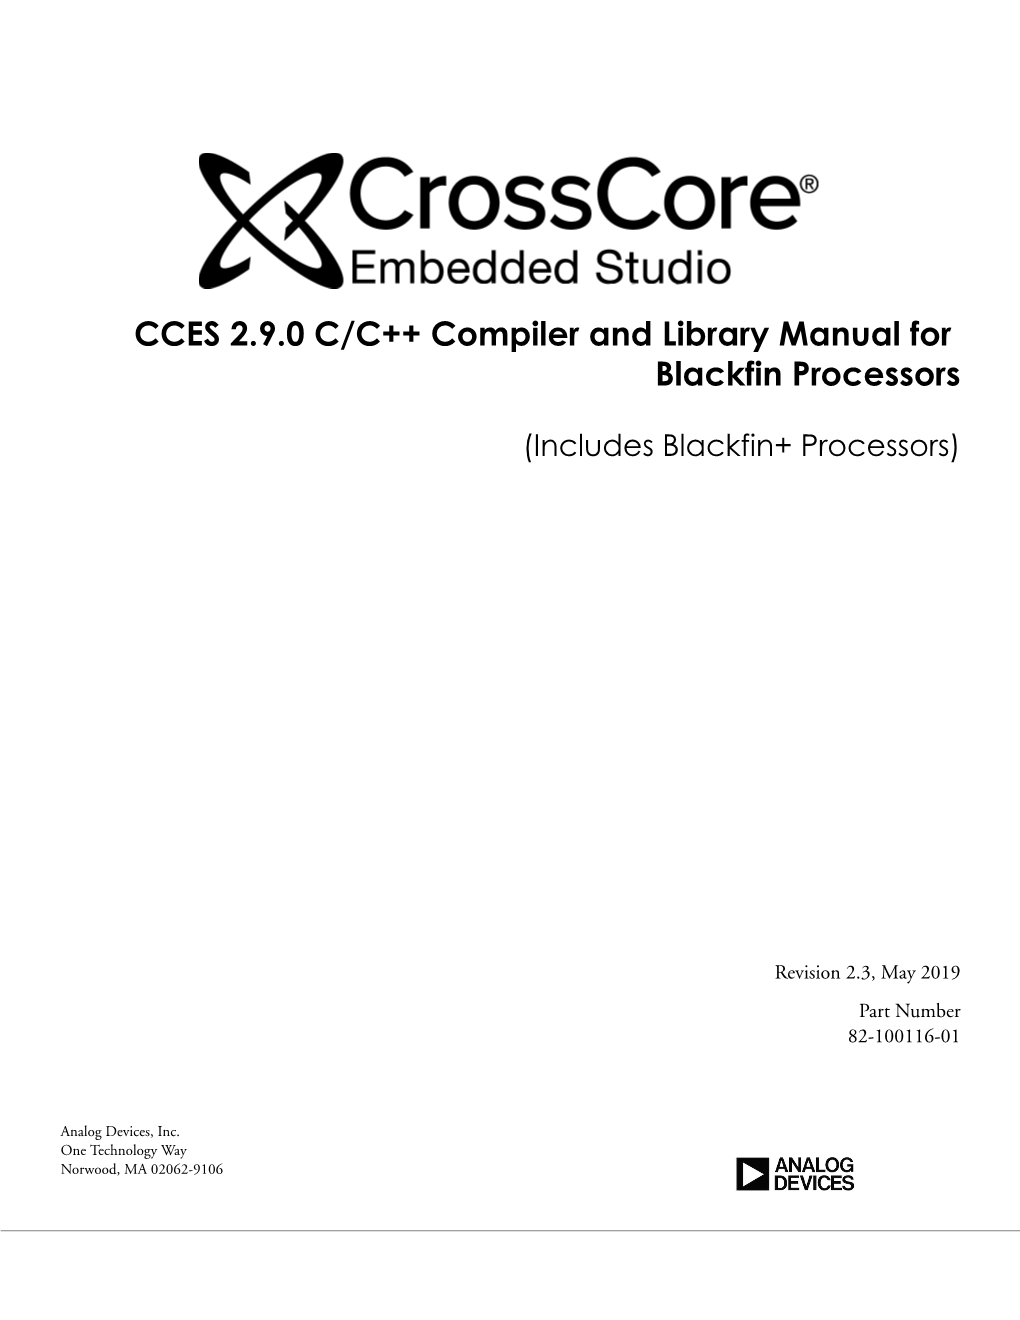 Crosscore Embedded Studio 2.9.0 C/C++ Compiler and Library